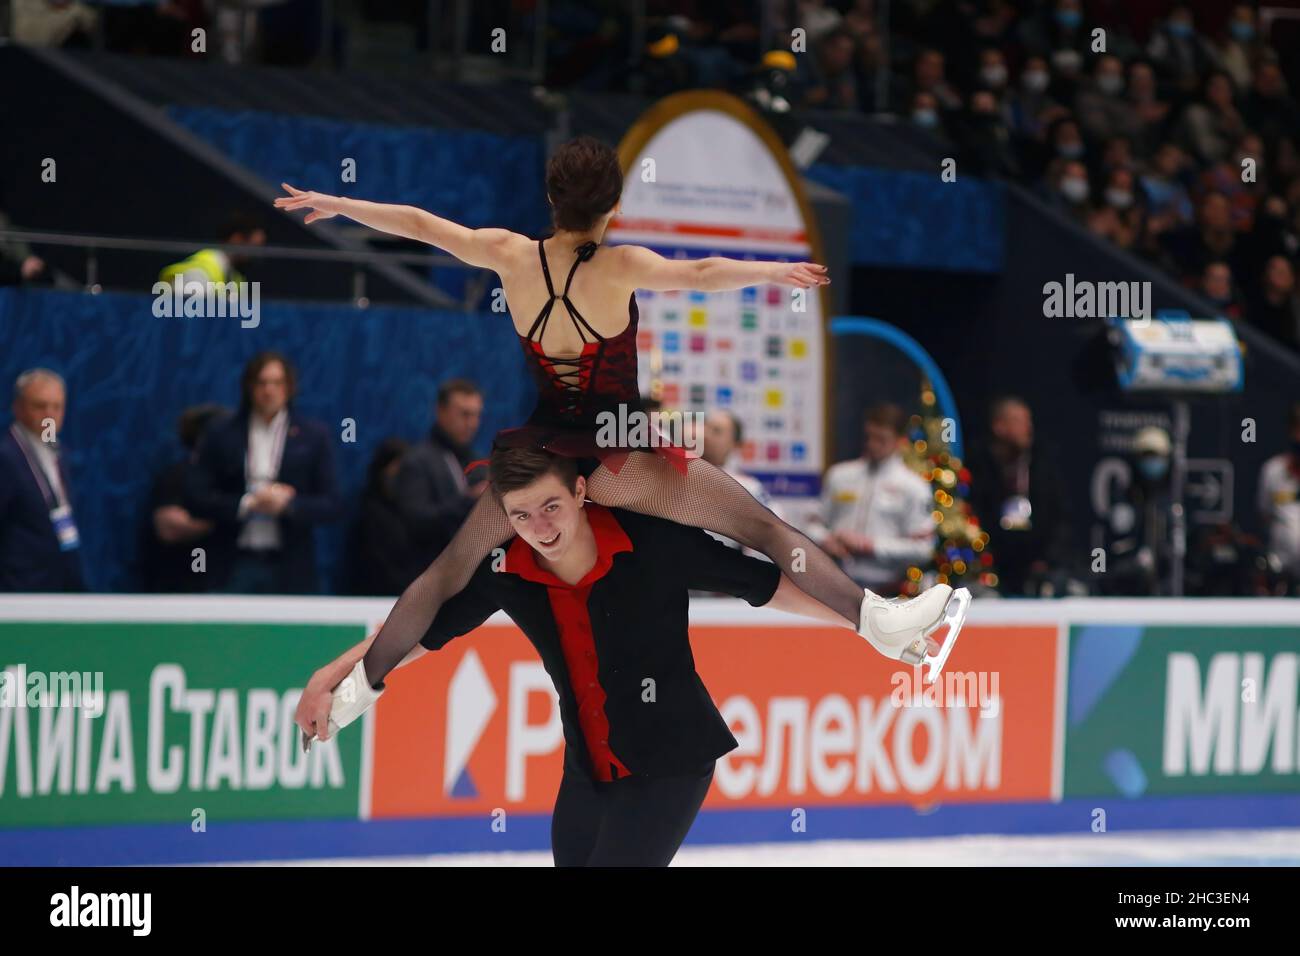 Saint Petersburg, Russia. 23rd Dec, 2021. Daria Pavliuchenko, Denis Khodykin of Russia compete during the Pairs, Short Program on day one of the Rostelecom Russian Nationals 2022 of Figure Skating at the Yubileyny Sports Palace in Saint Petersburg. Final score: 75.40 (Photo by Maksim Konstantinov/SOPA Image/Sipa USA) Credit: Sipa USA/Alamy Live News Stock Photo